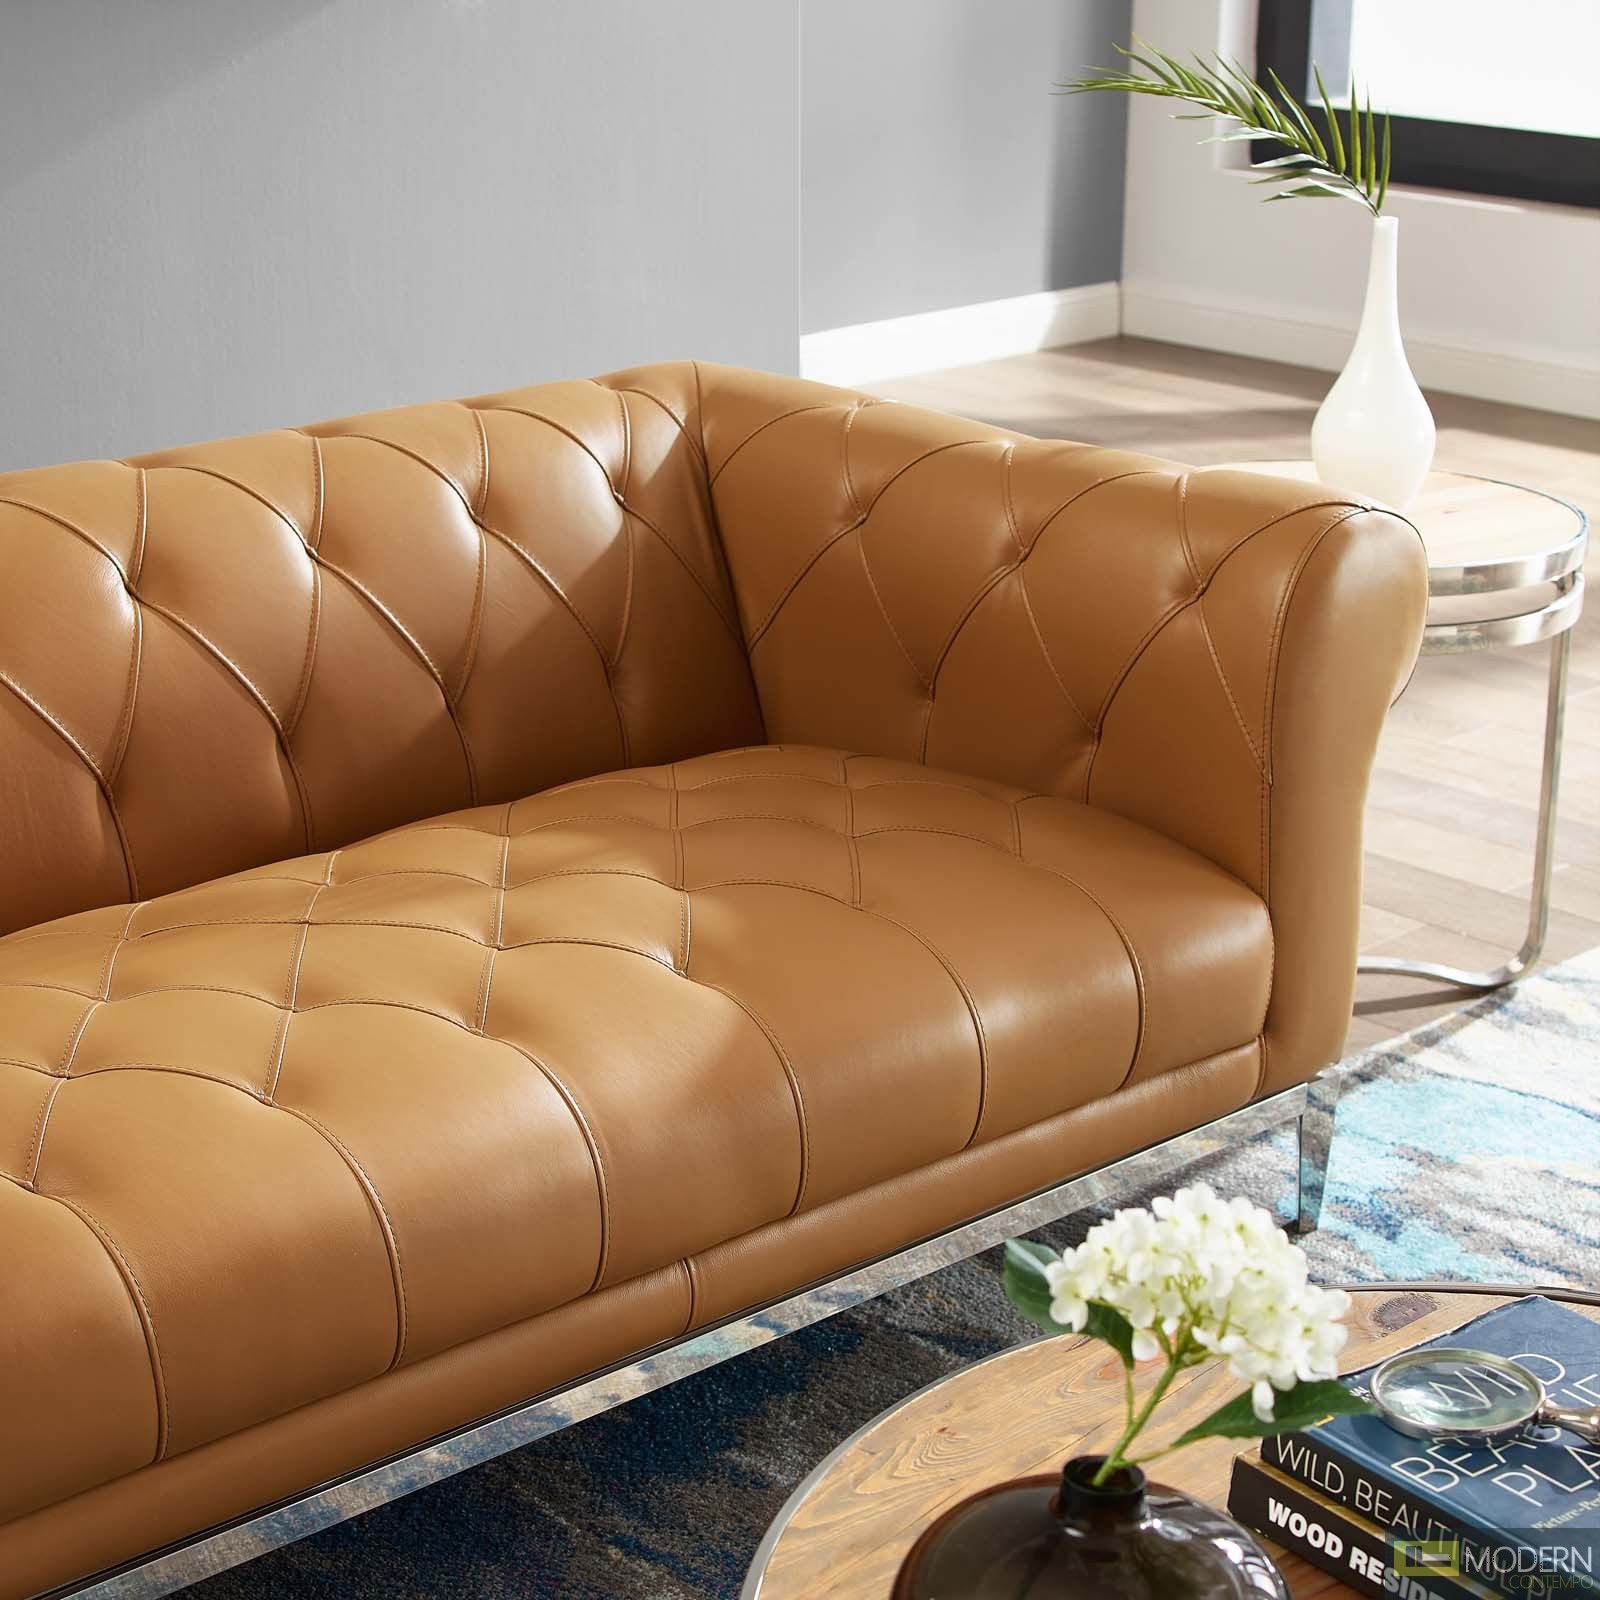 Modern Contempo – Cyprus Tufted Button Upholstered Leather Chesterfield Throughout Tufted Upholstered Sofas (Gallery 3 of 20)